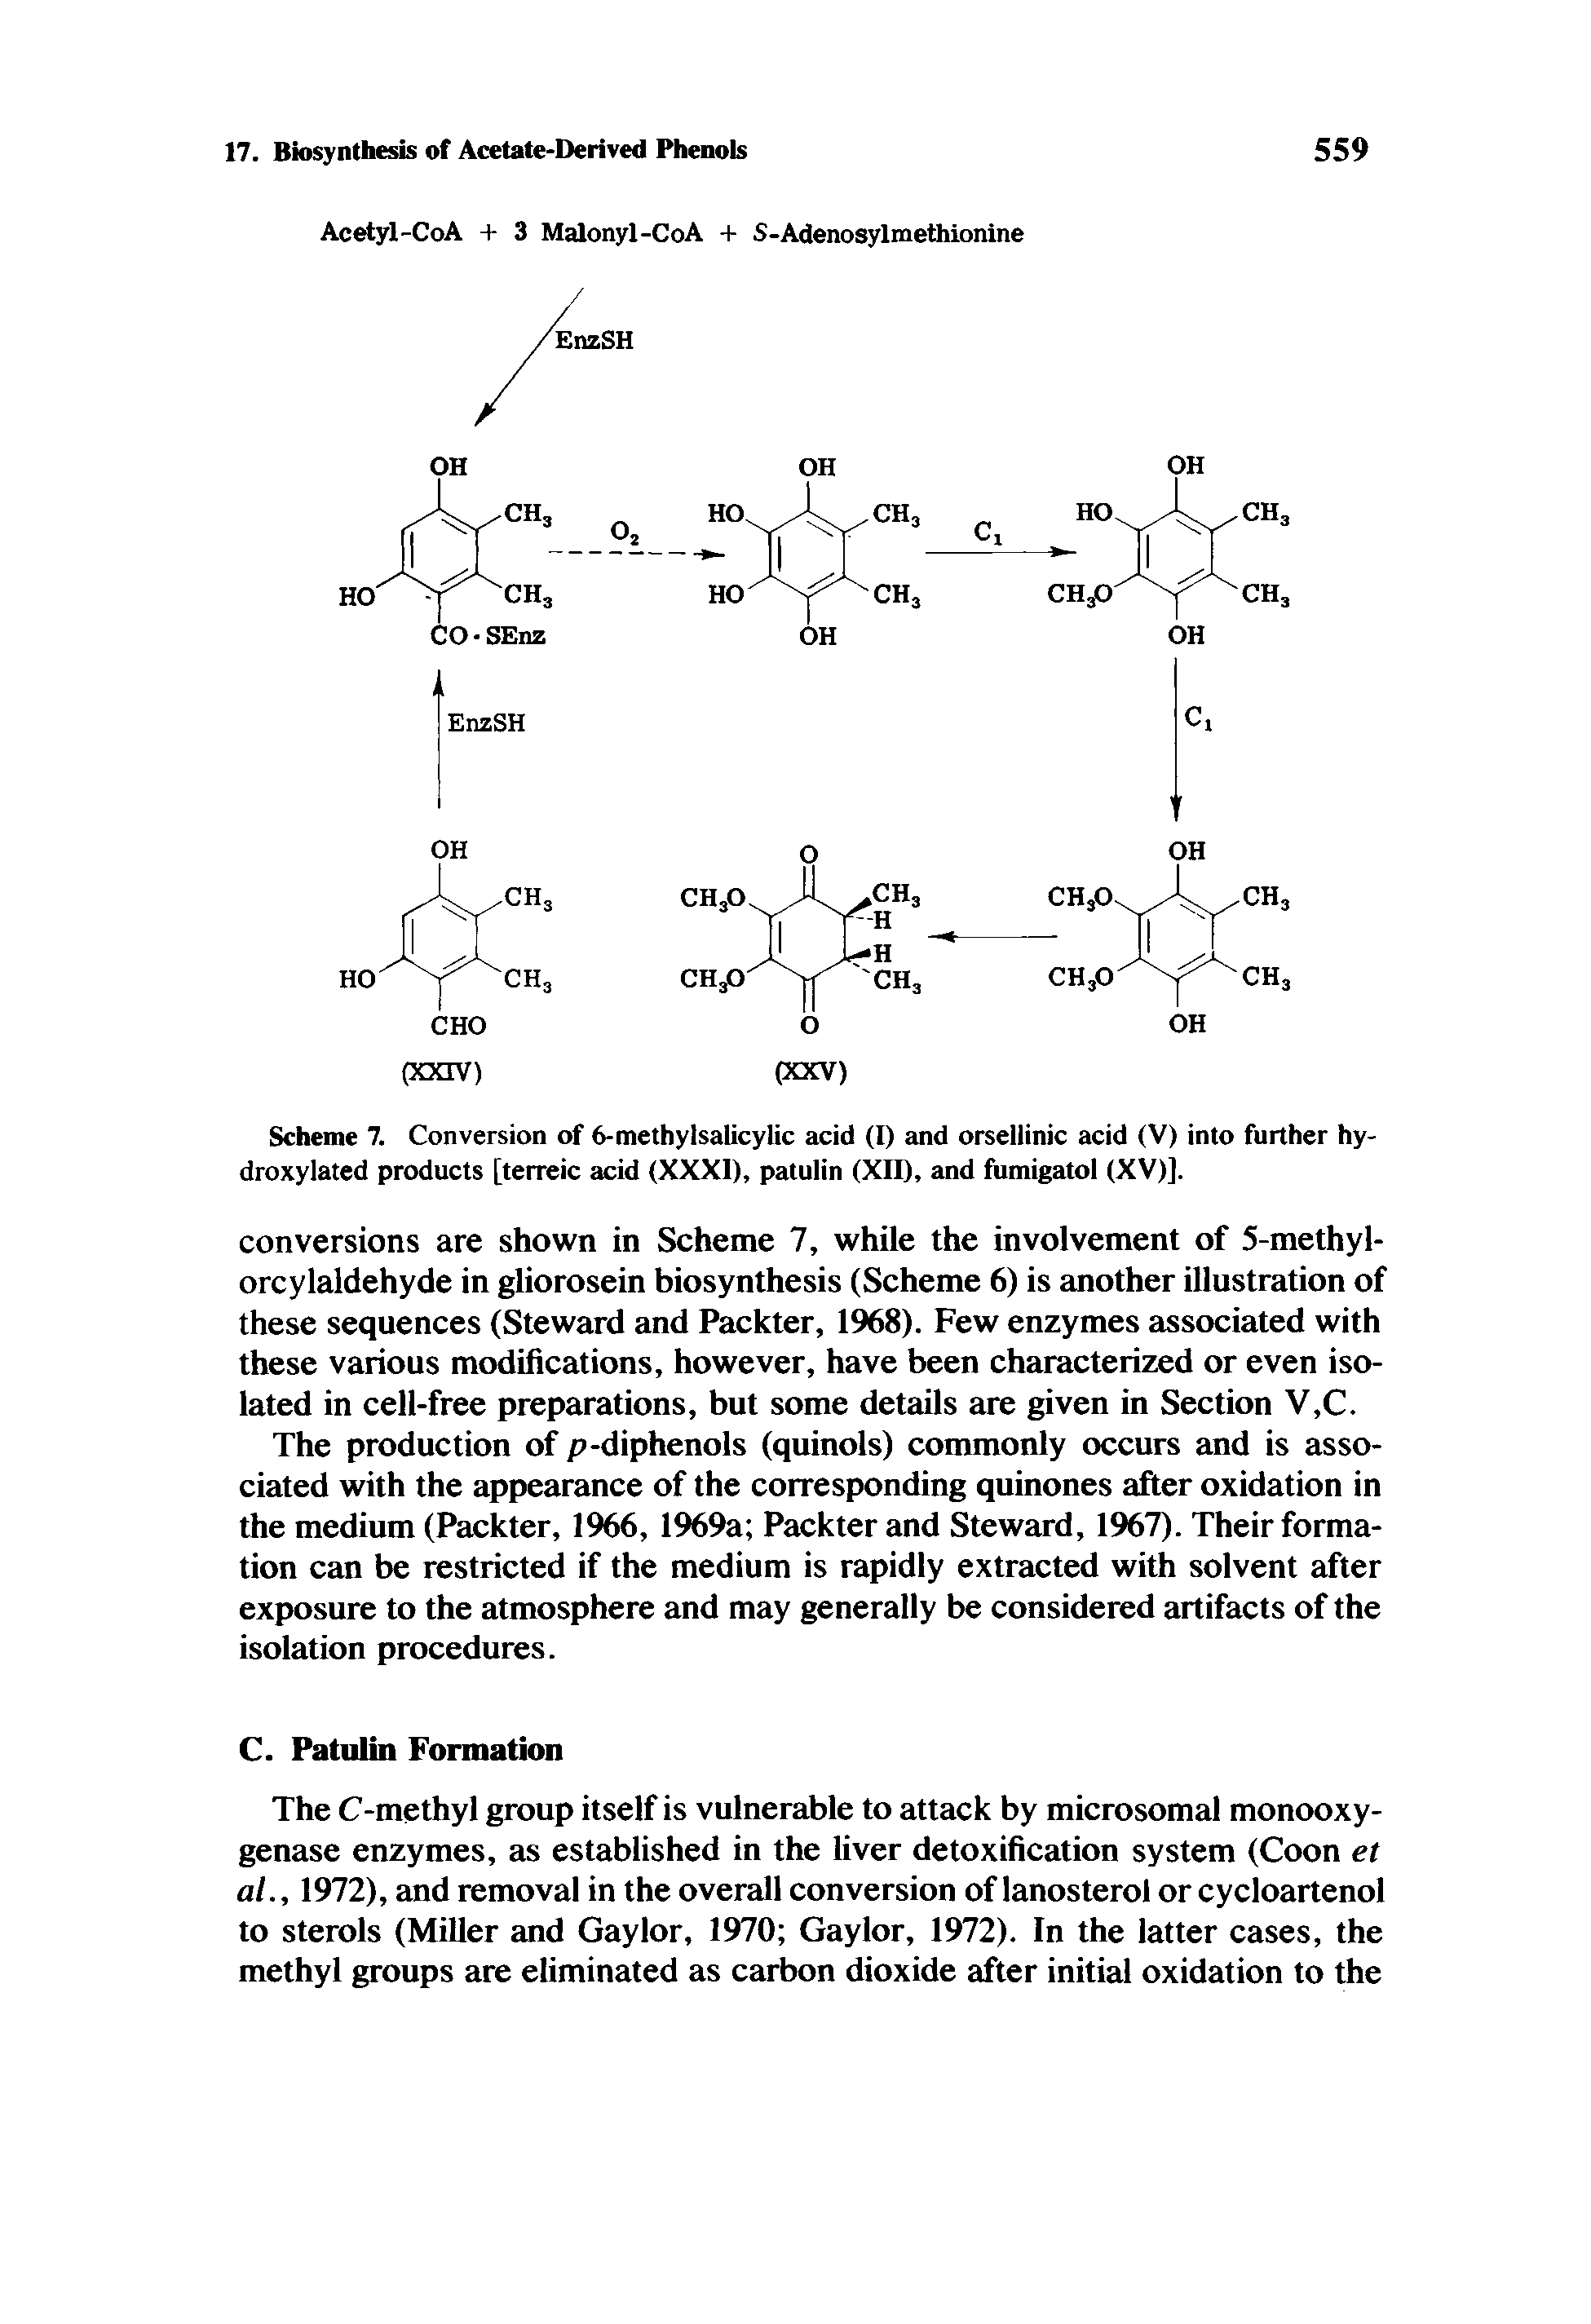 Scheme 7. Conversion of 6-methylsalicylic acid (I) and orsellinic acid (V) into further hy-droxylated products [terreic acid (XXXI), patulin (XII), and fumigatol (XV)].